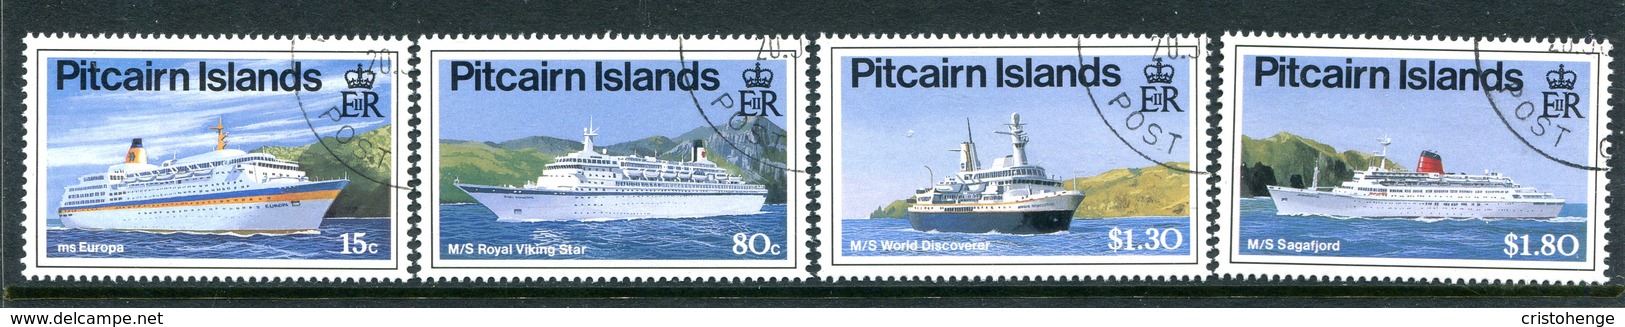 Pitcairn Islands 1991 Cruise Liners Set Used (SG 395-398) - Pitcairn Islands